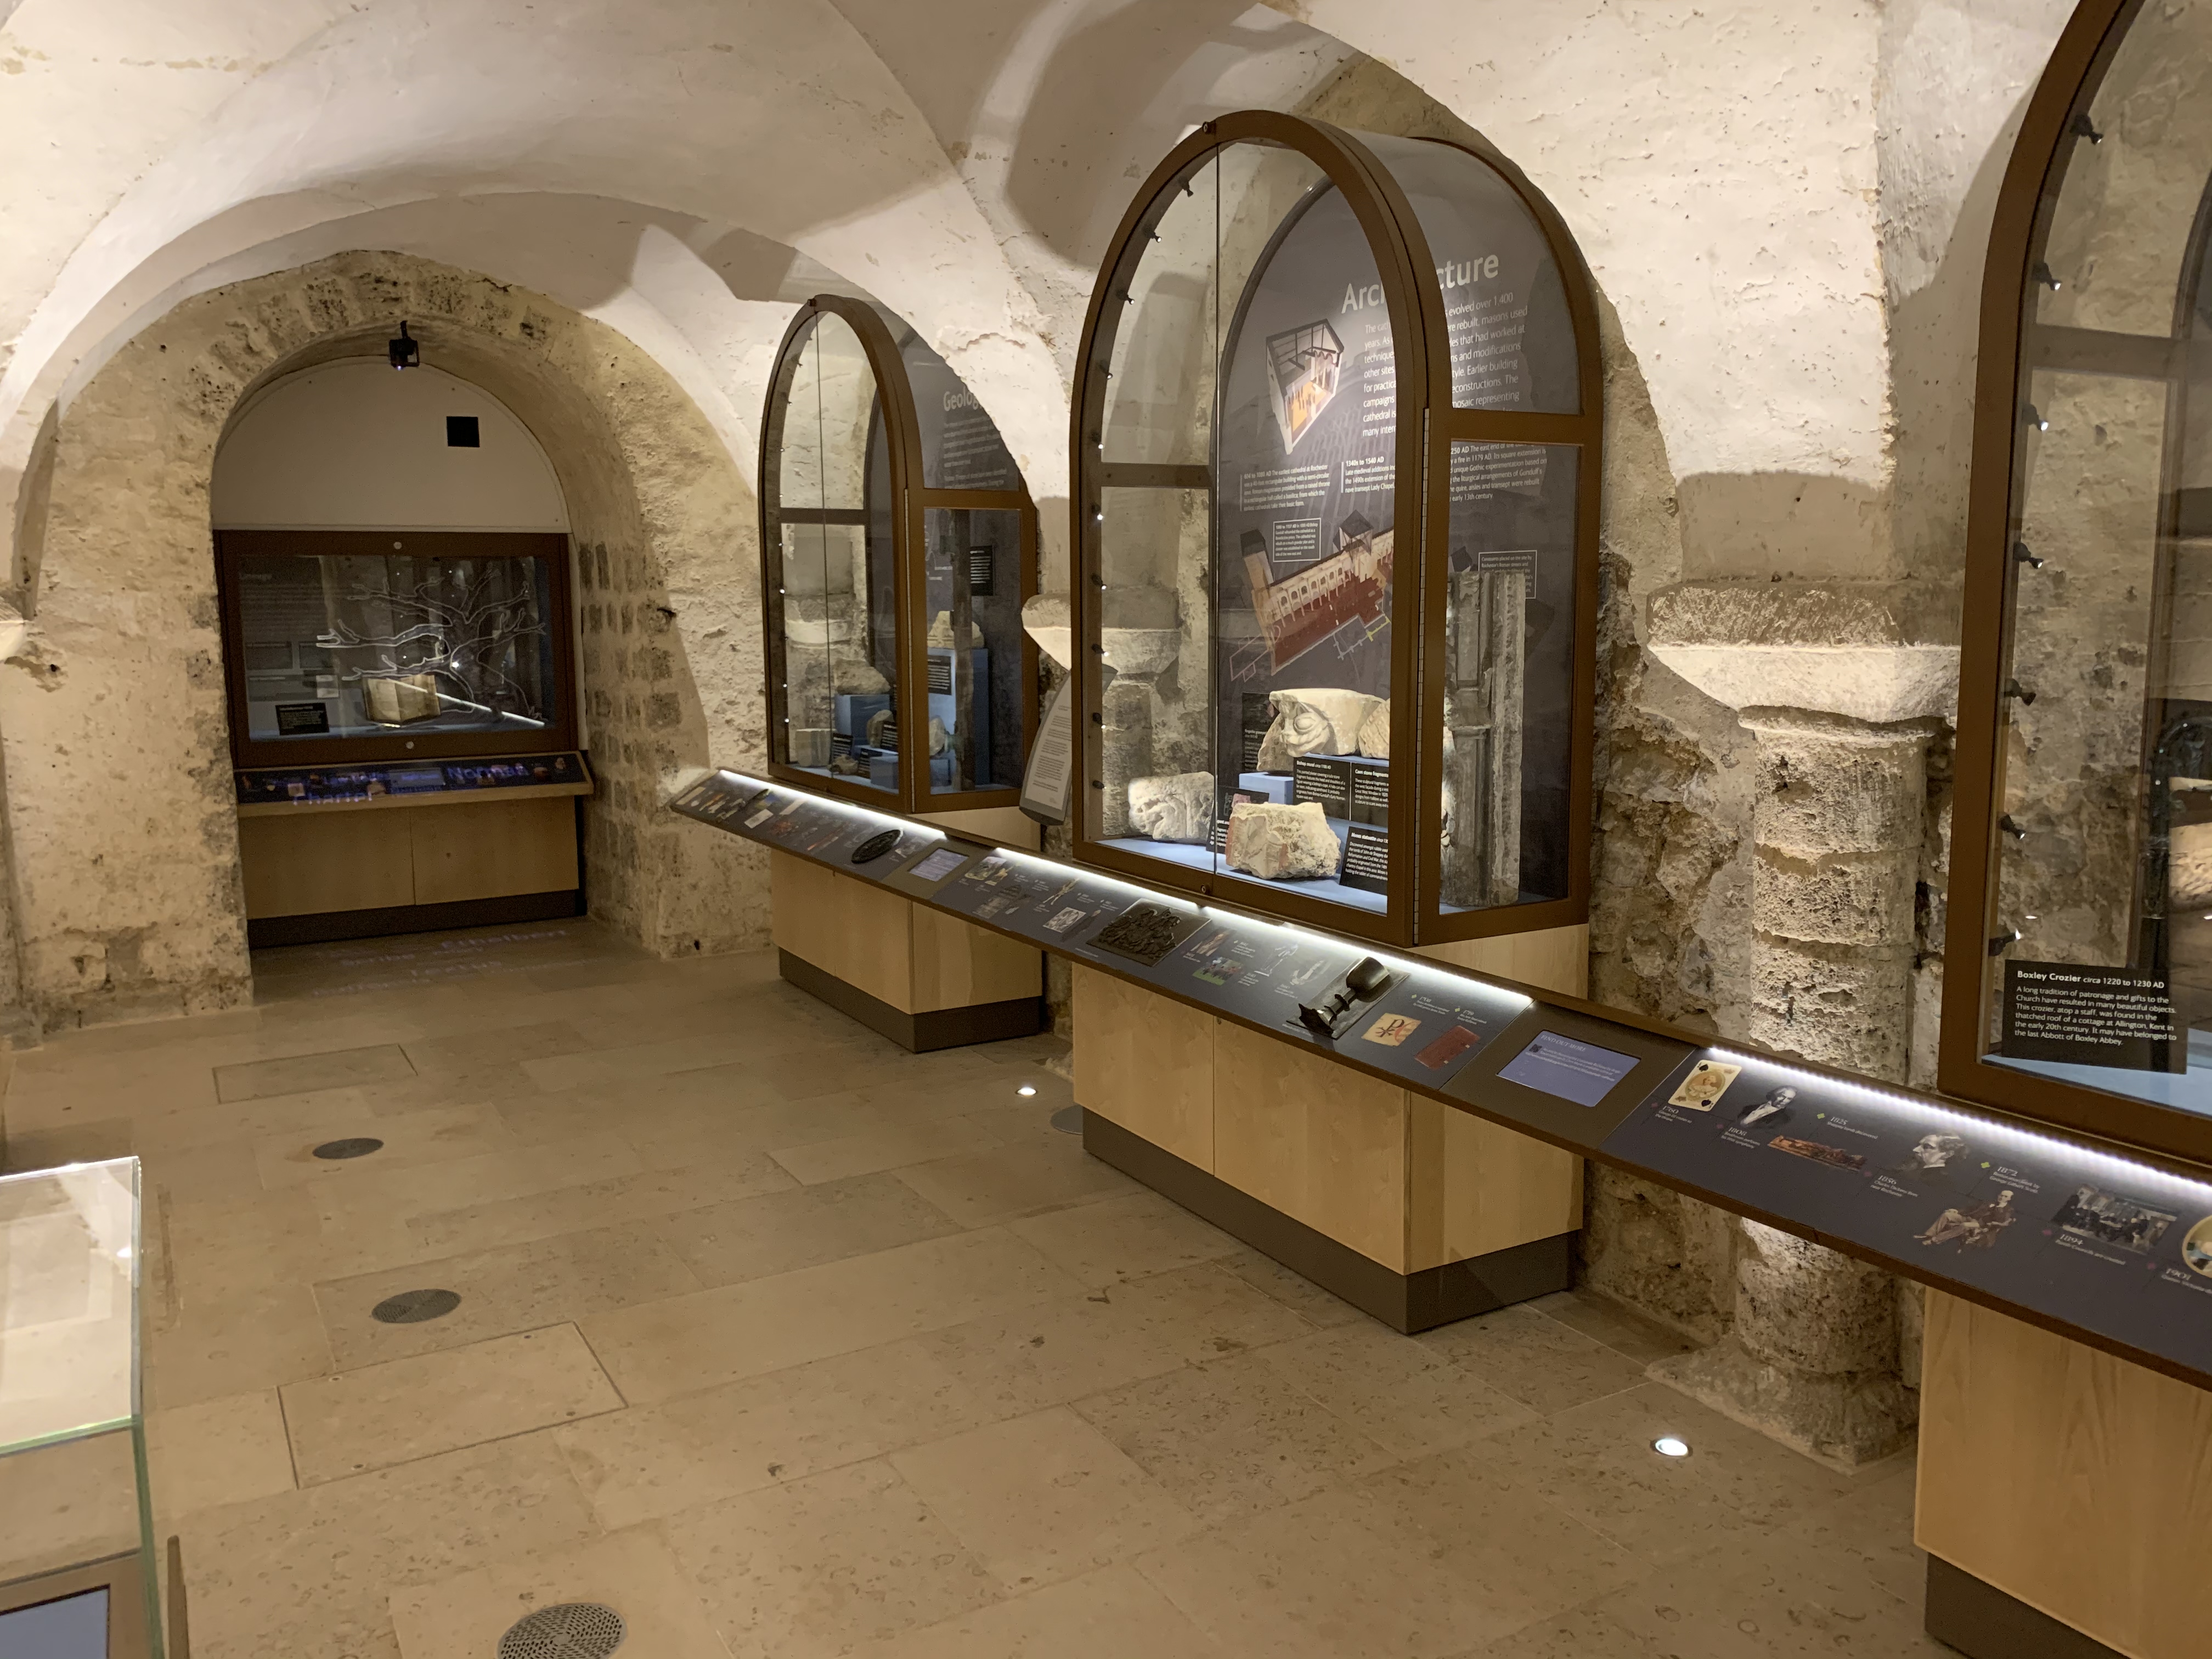 Photograph of the Big History exhibition in the cathedral crypt.